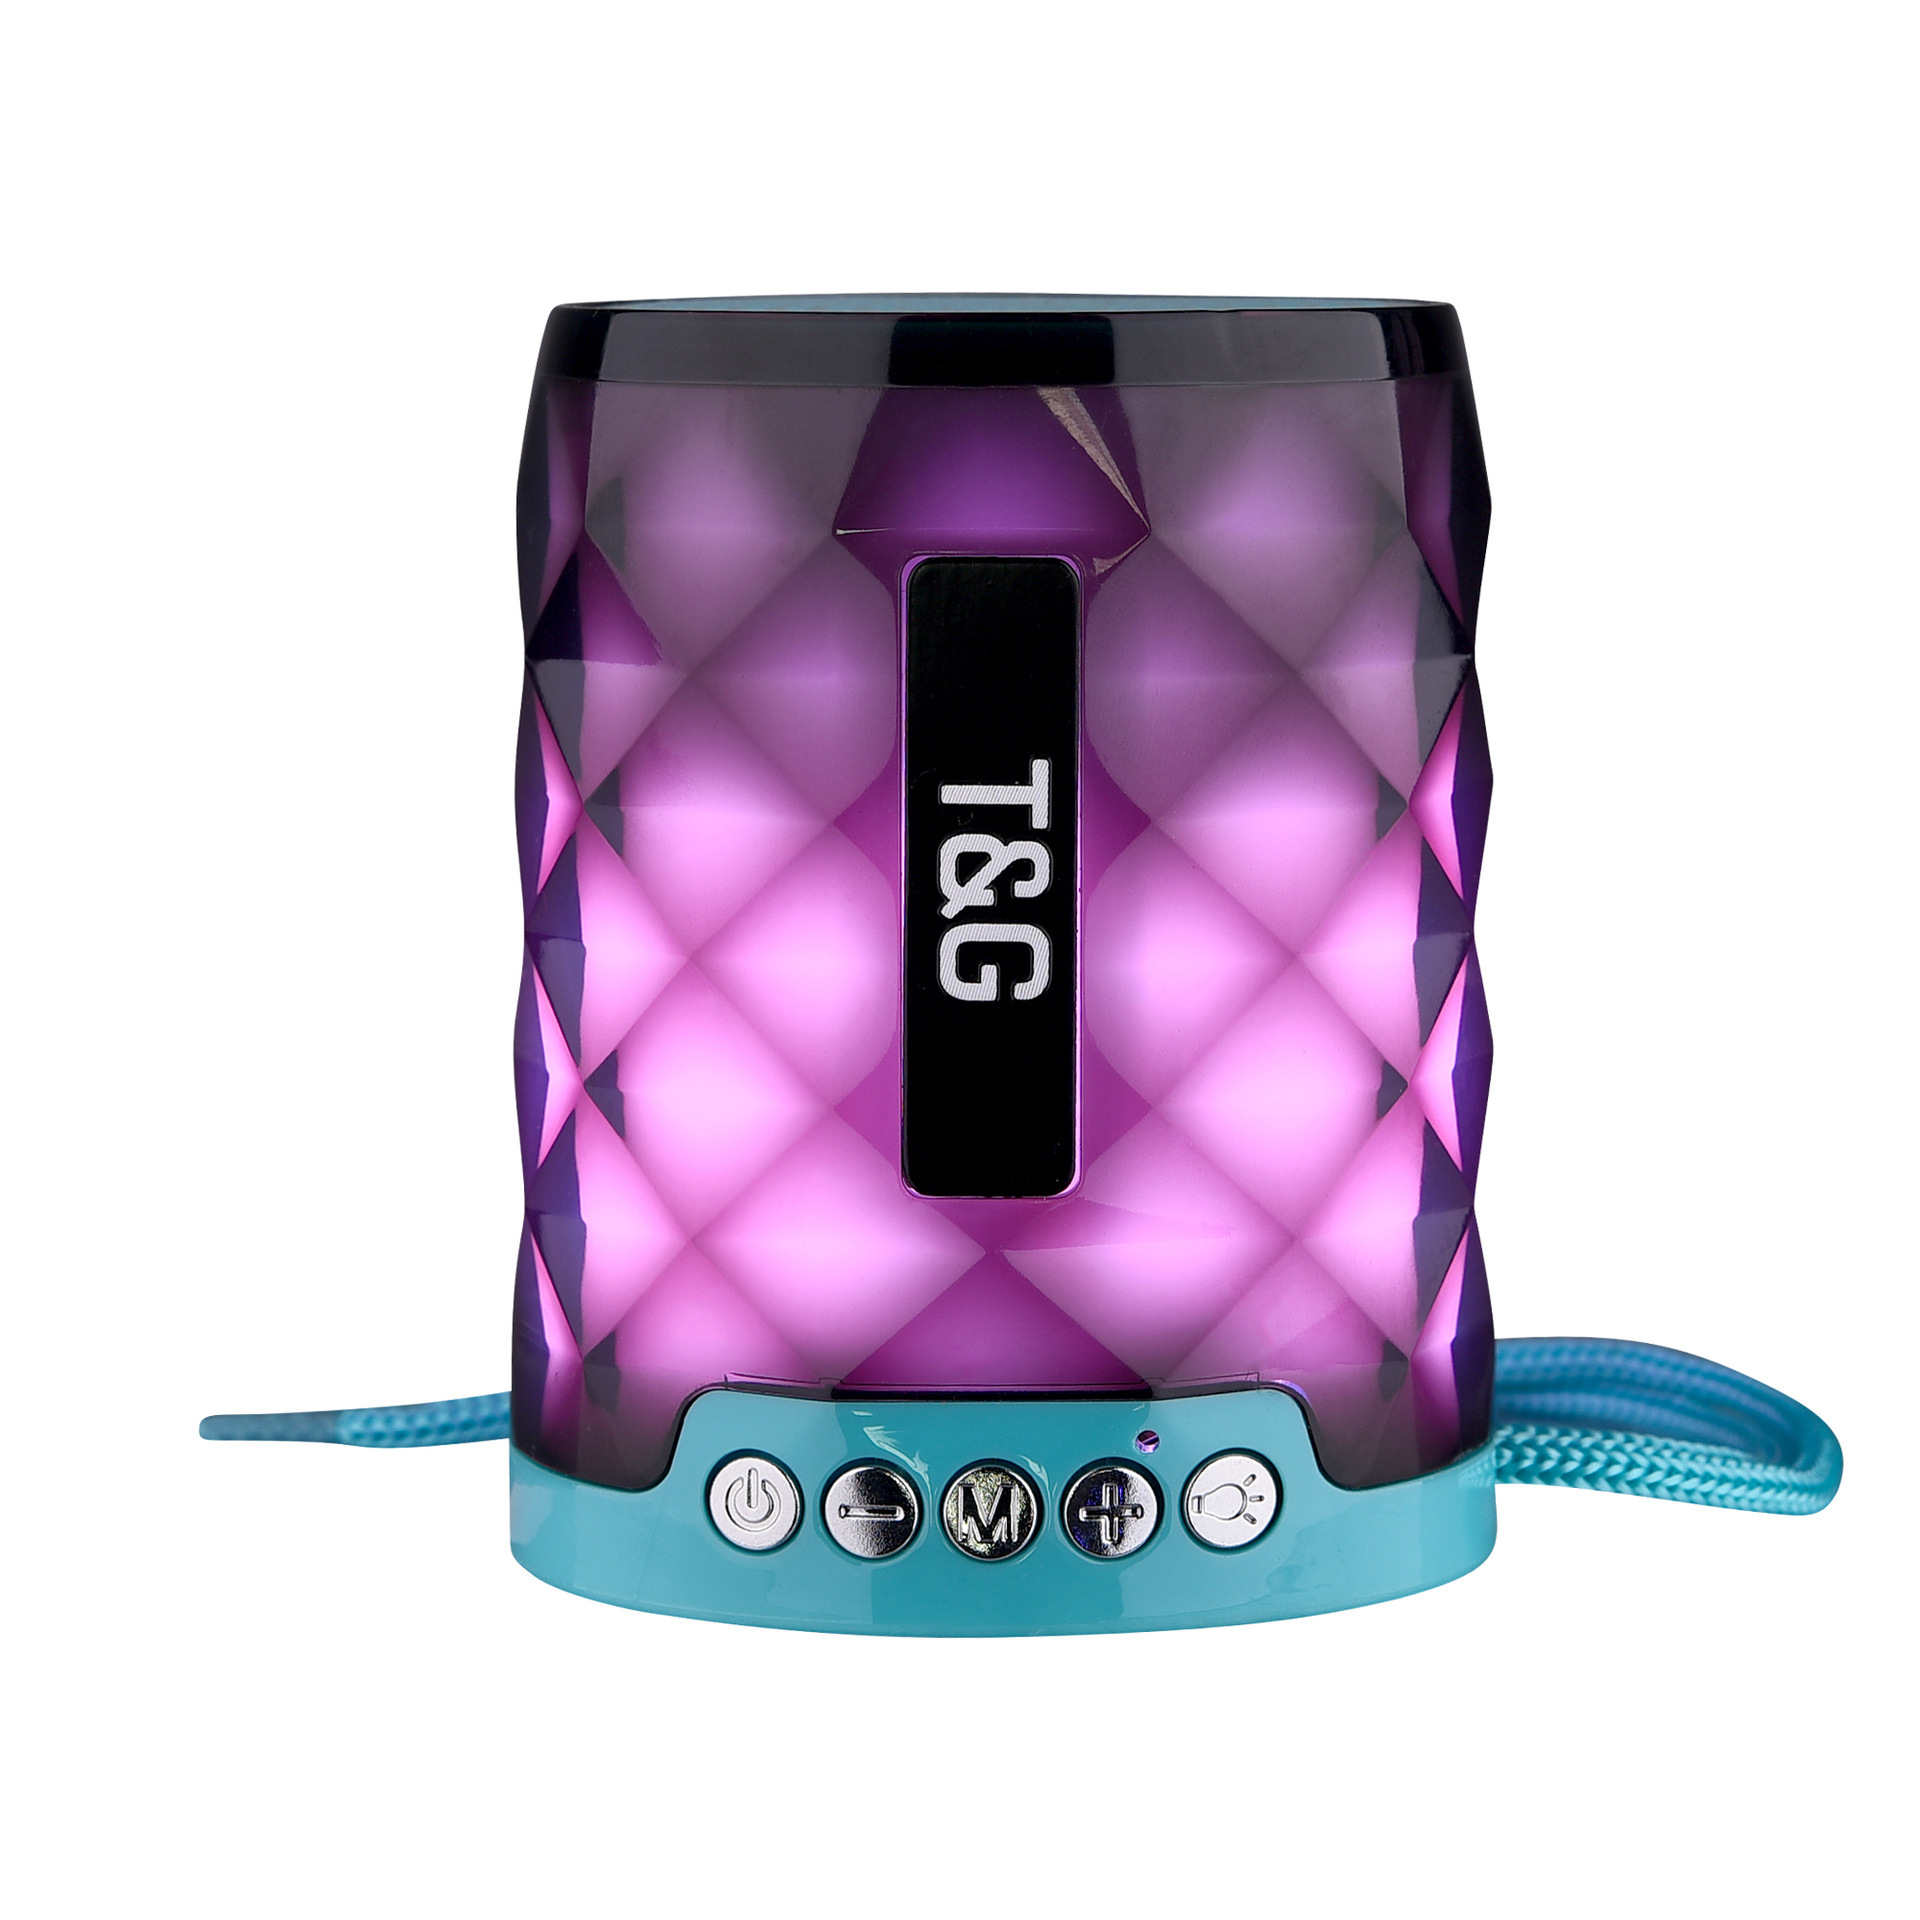 Tg155 Bluetooth Speaker Wireless Colorful Light Portable Card Subwoofer Mobile Phone Outdoor Mini Audio Gift